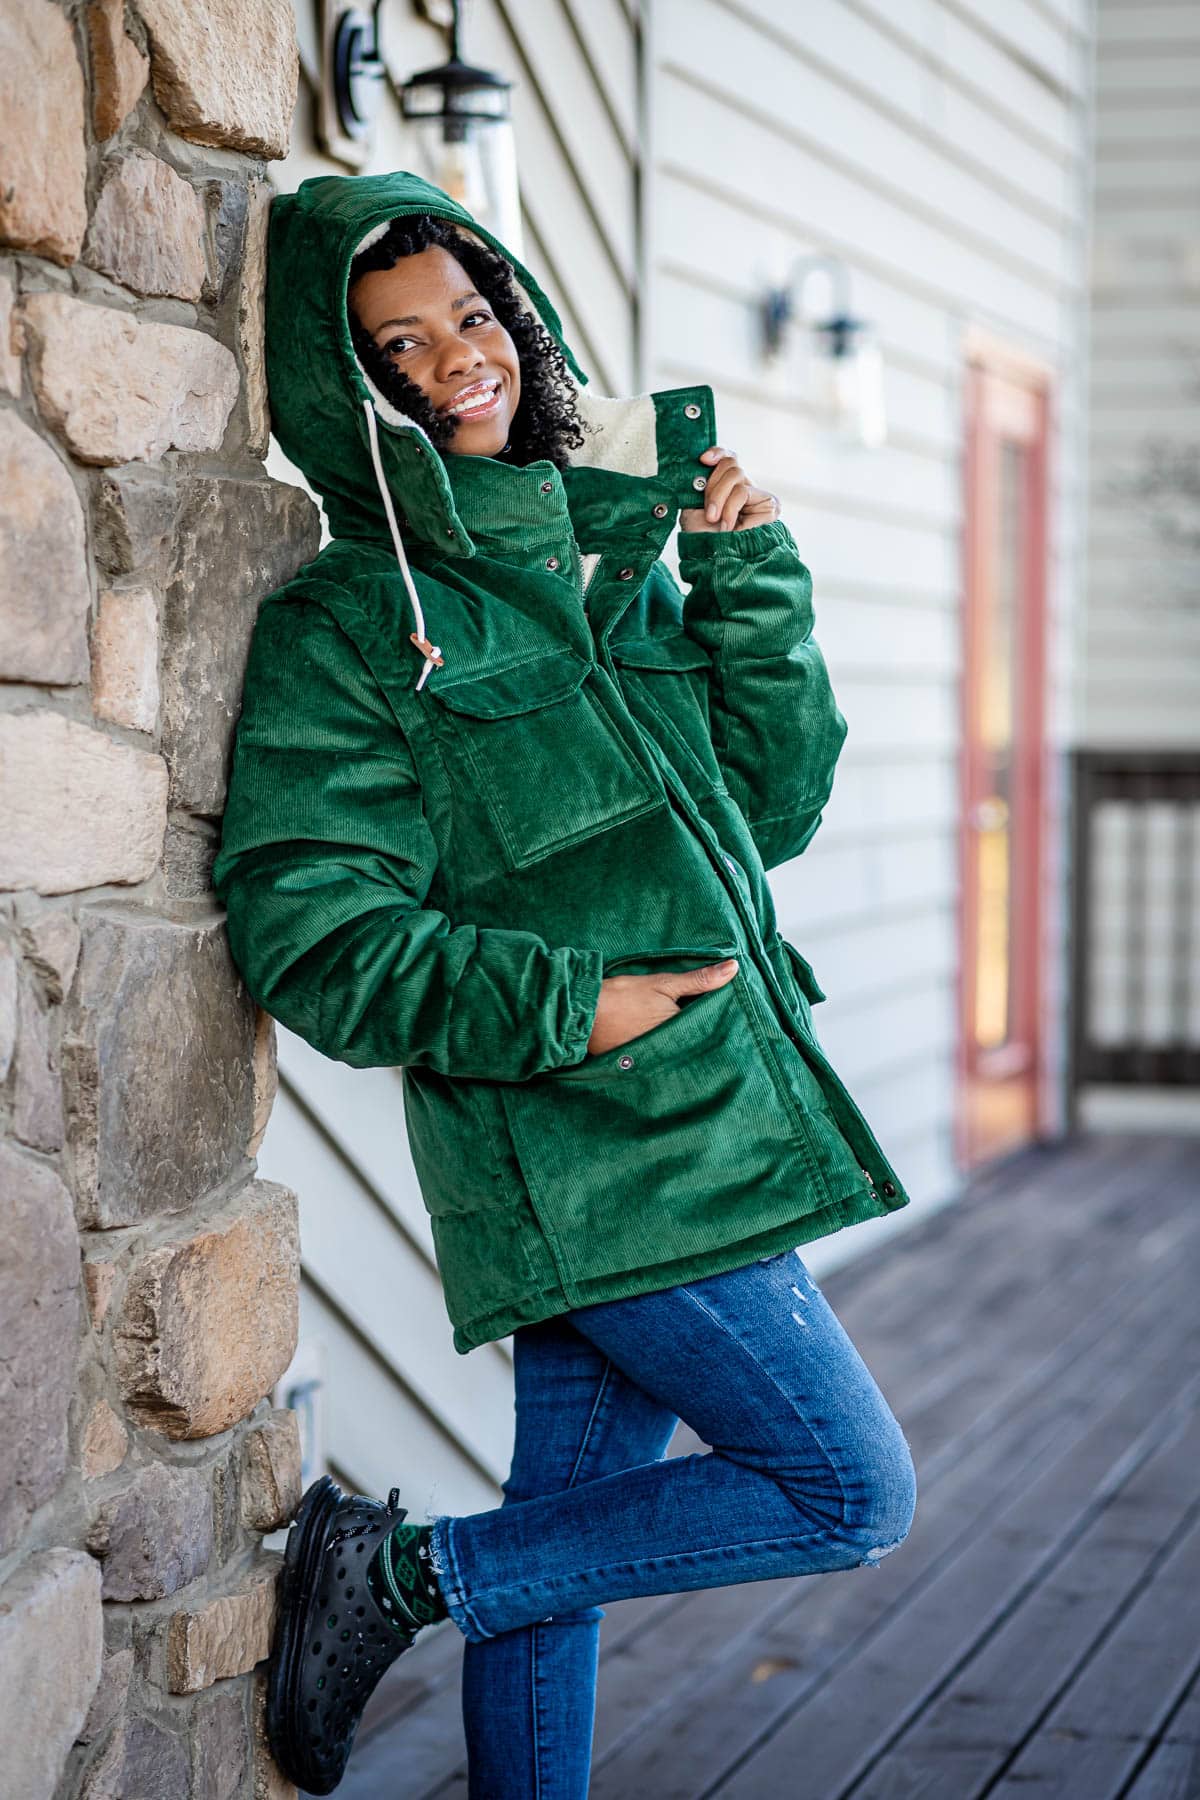 The Ultimate Guide To Comfortable Winter Clothes: Winter Outfit Ideas To Keep Warm During The Cold Weather 73 Daily Mom, Magazine For Families